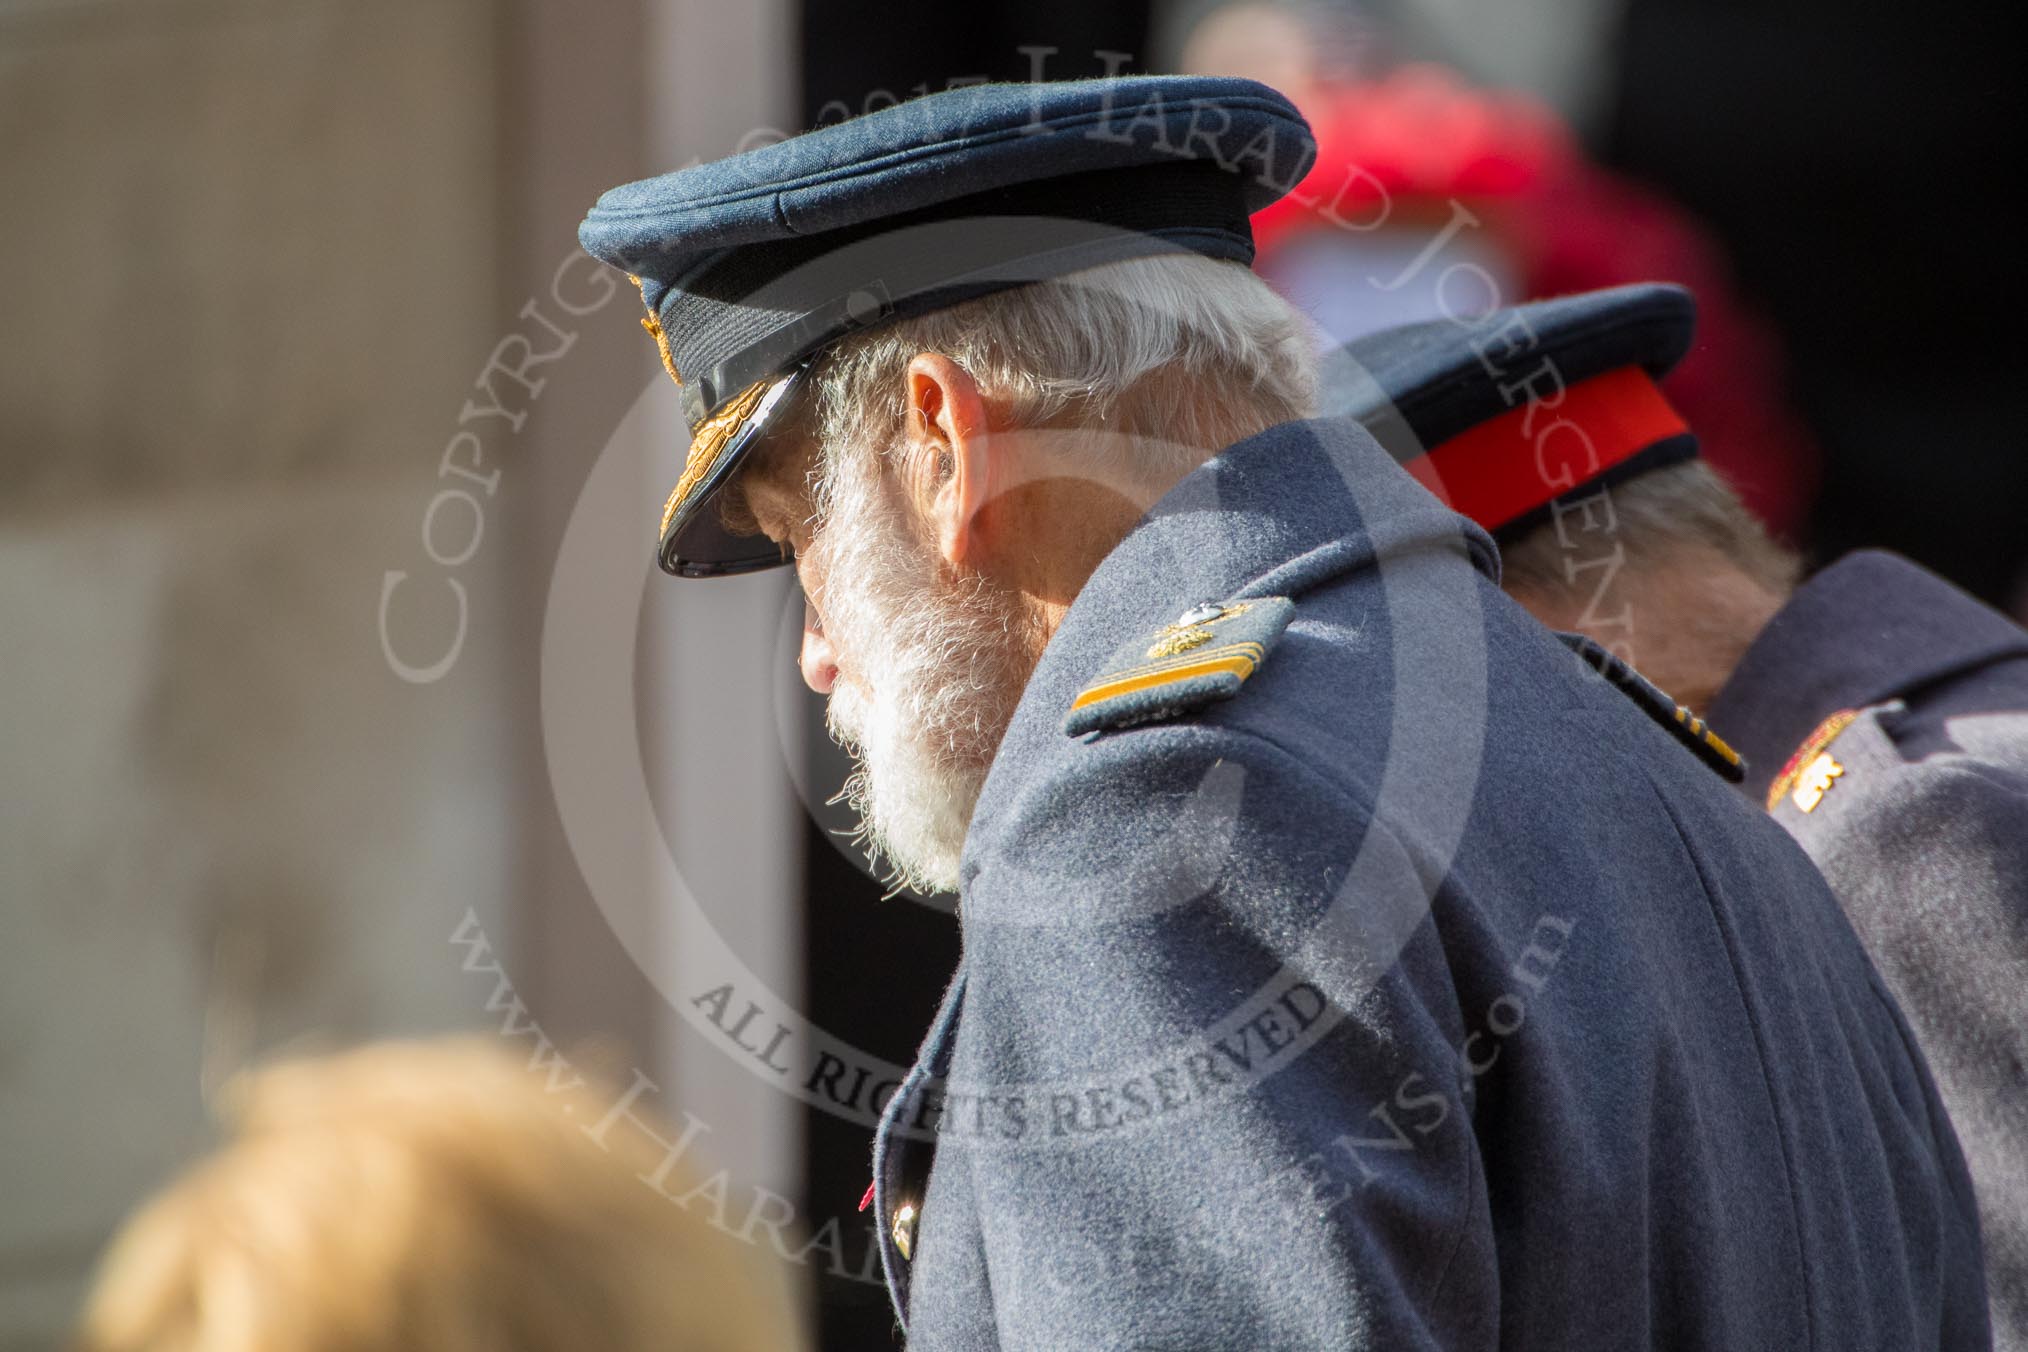 HRH Prince Michael of Kent at the Cenotaph during the Remembrance Sunday Cenotaph Ceremony 2018 at Horse Guards Parade, Westminster, London, 11 November 2018, 11:07.